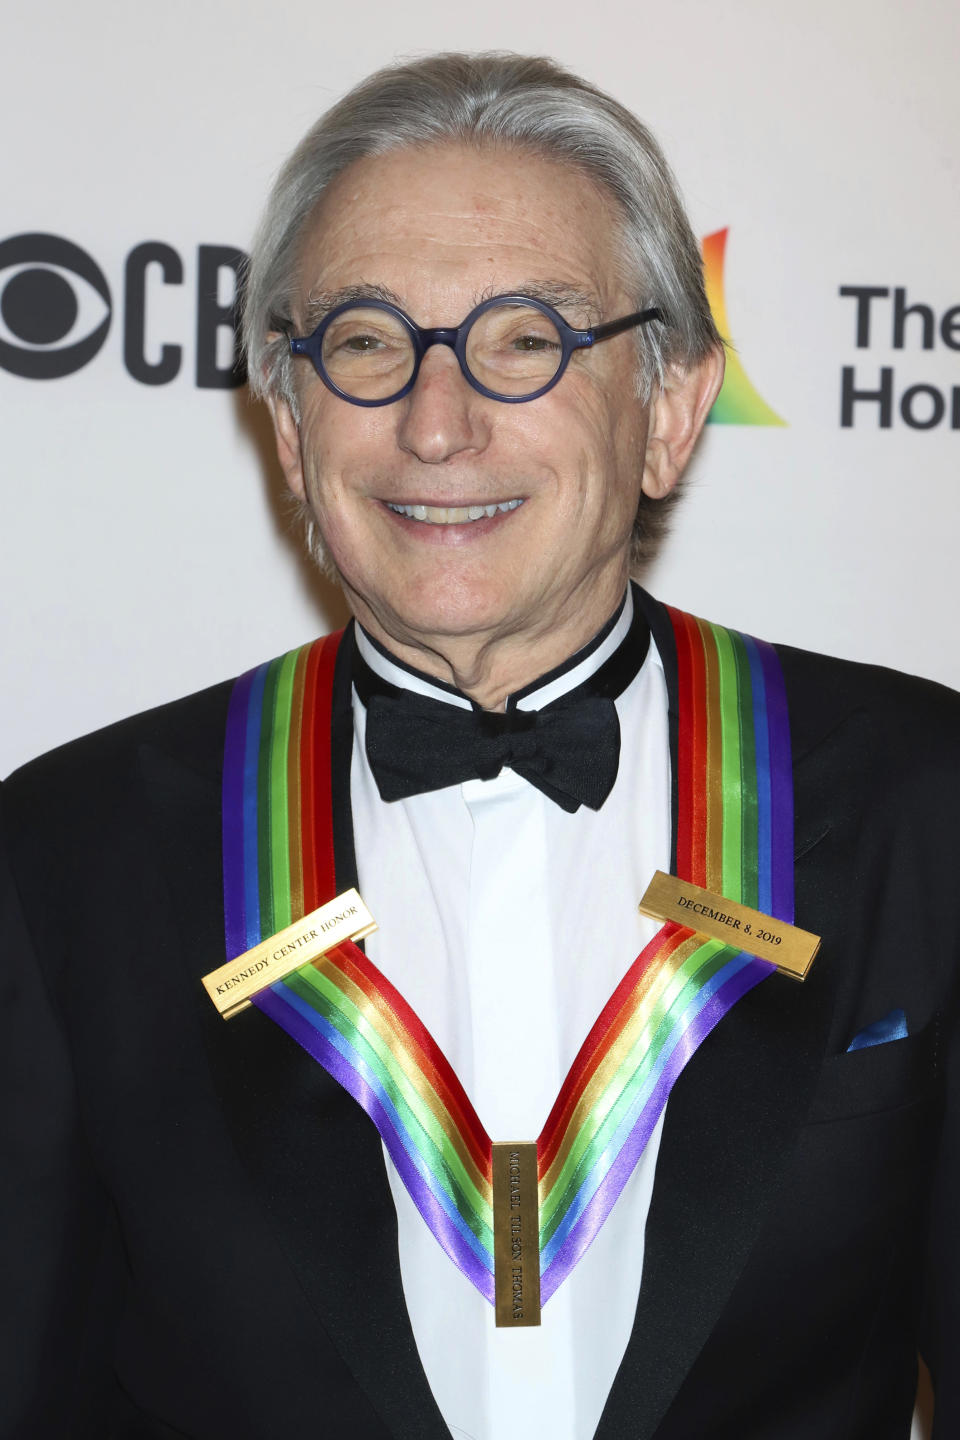 2019 Kennedy Center honoree Michael Tilson Thomas attends the 42nd Annual Kennedy Center Honors at The Kennedy Center, Sunday, Dec. 8, 2019, in Washington. (Photo by Greg Allen/Invision/AP)